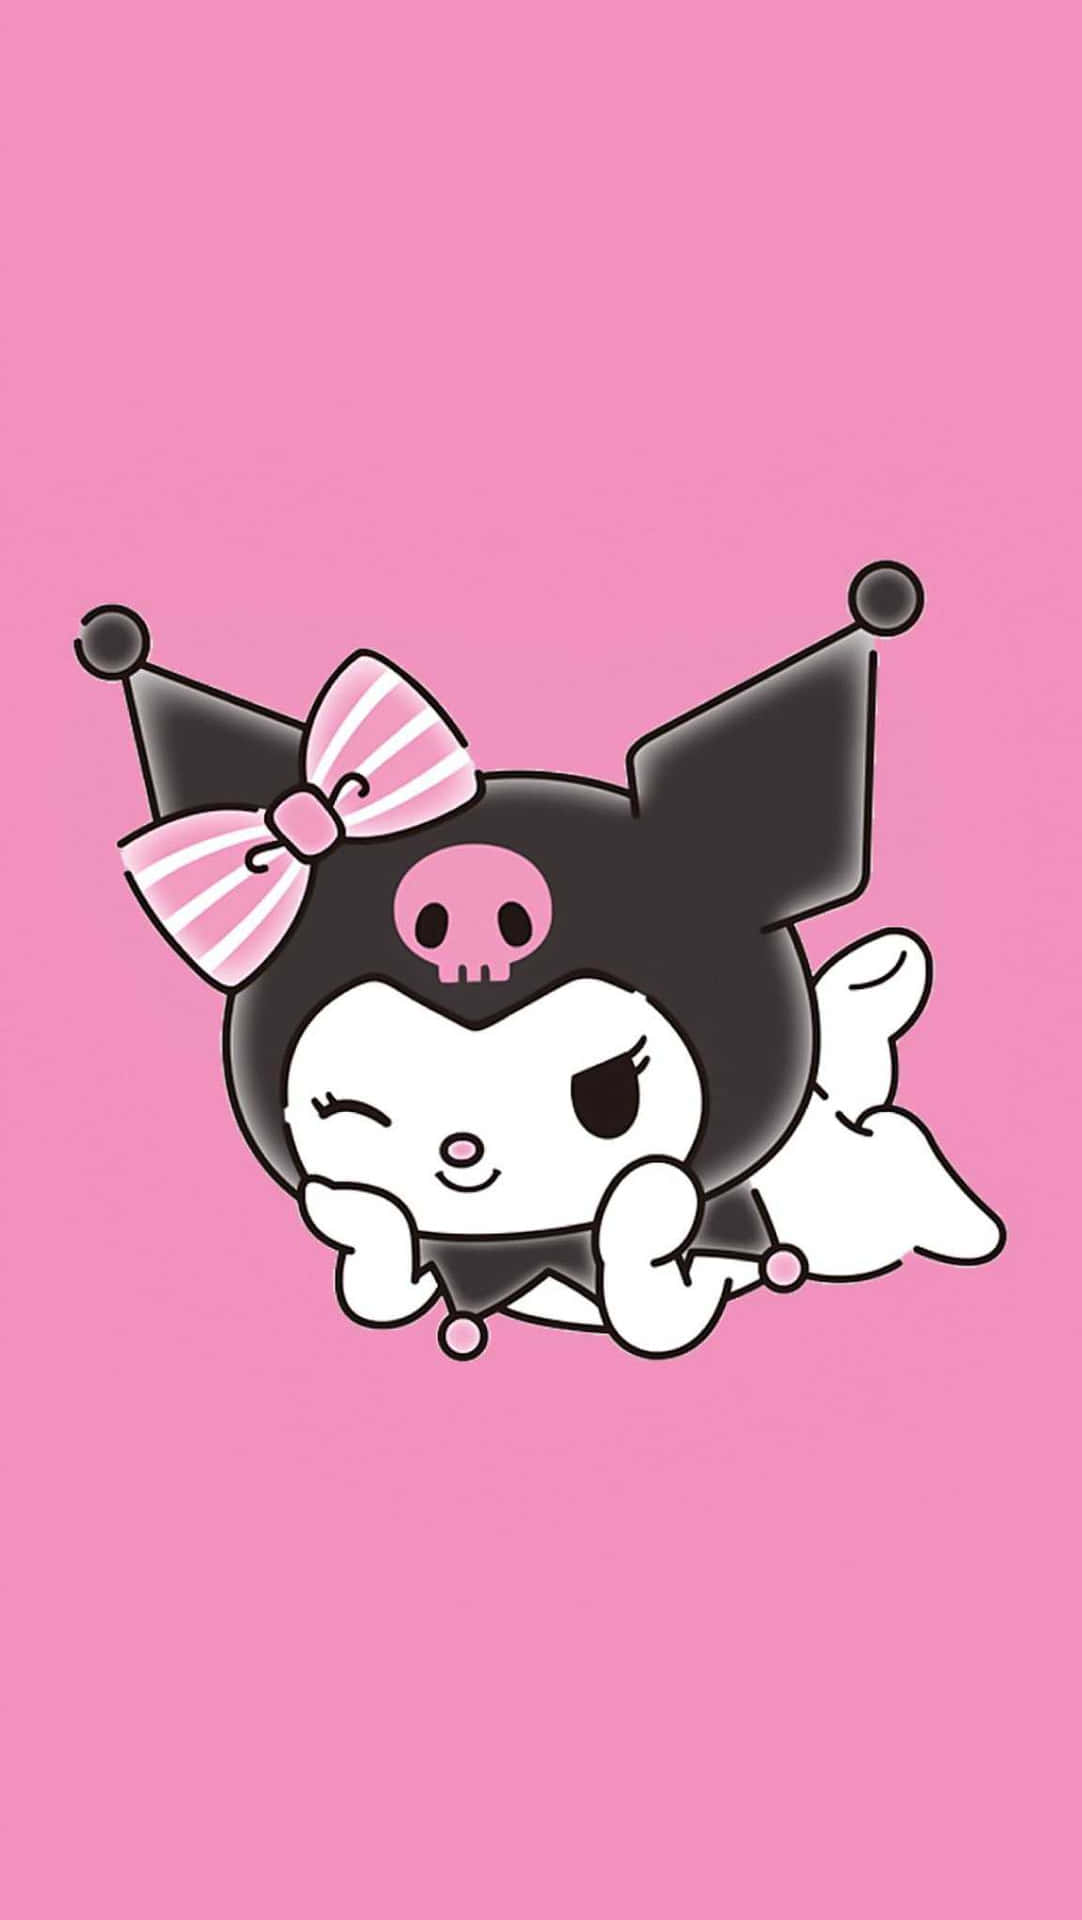 Kuromi, the mischievous yet adorable character from Sanrio, posing playfully on a vibrant background. Wallpaper